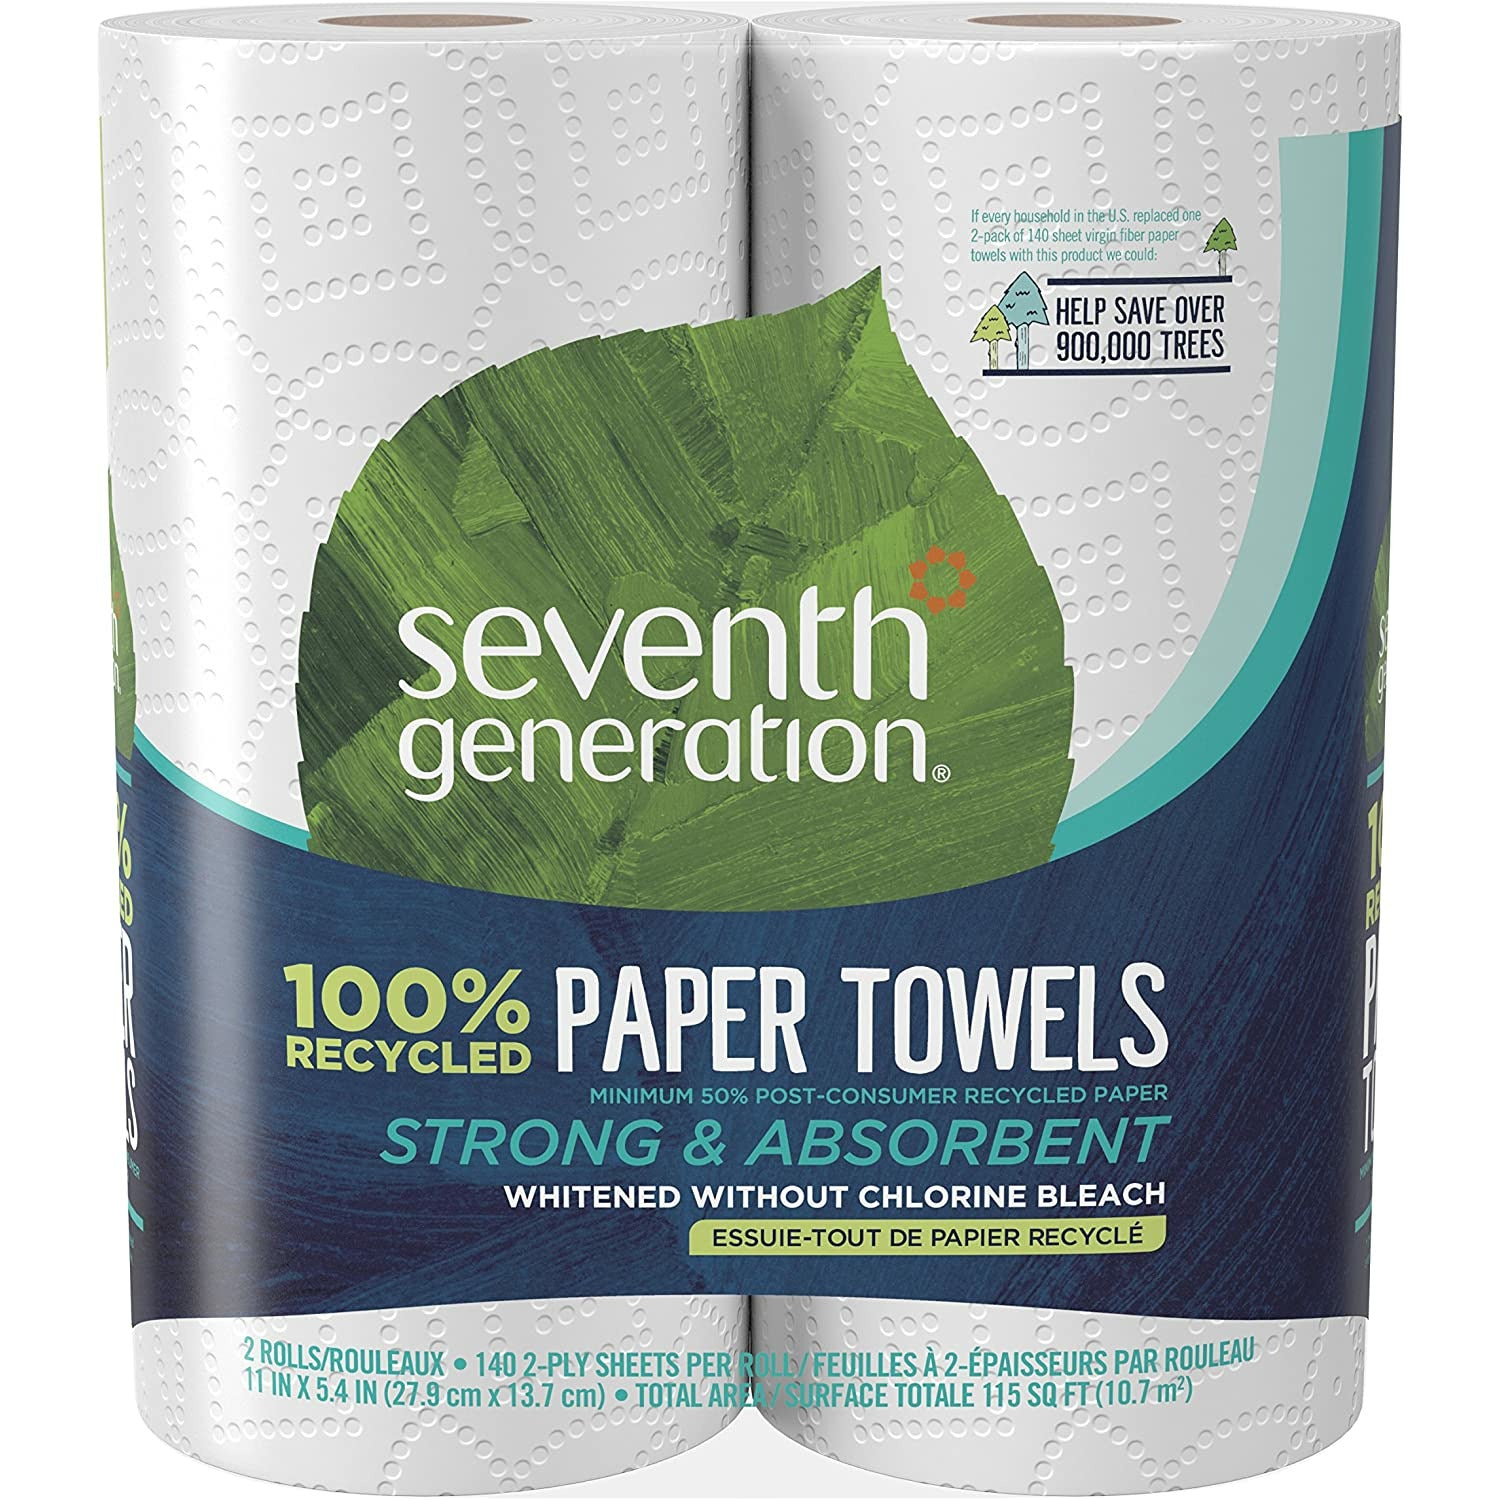 Seventh Generation Paper Towels, 100% Recycled Paper, 2-ply, 2 Rolls (Packaging May Vary)